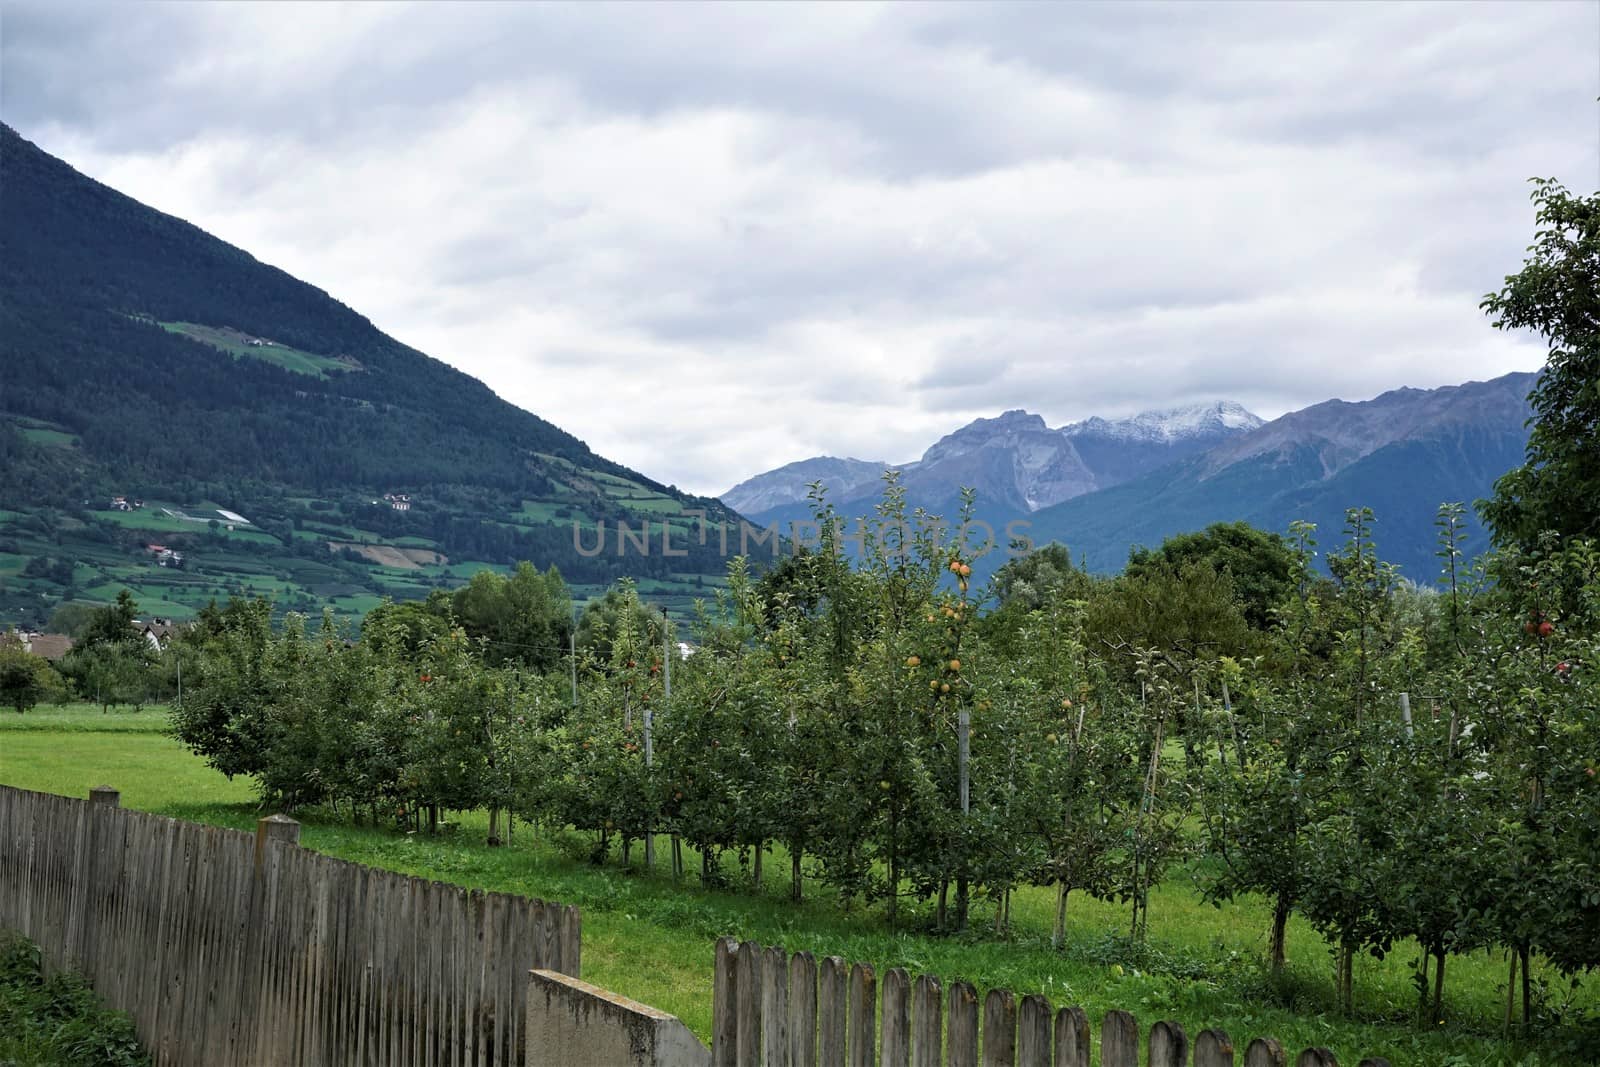 View to a mountain range with apple trees near Glurns by pisces2386